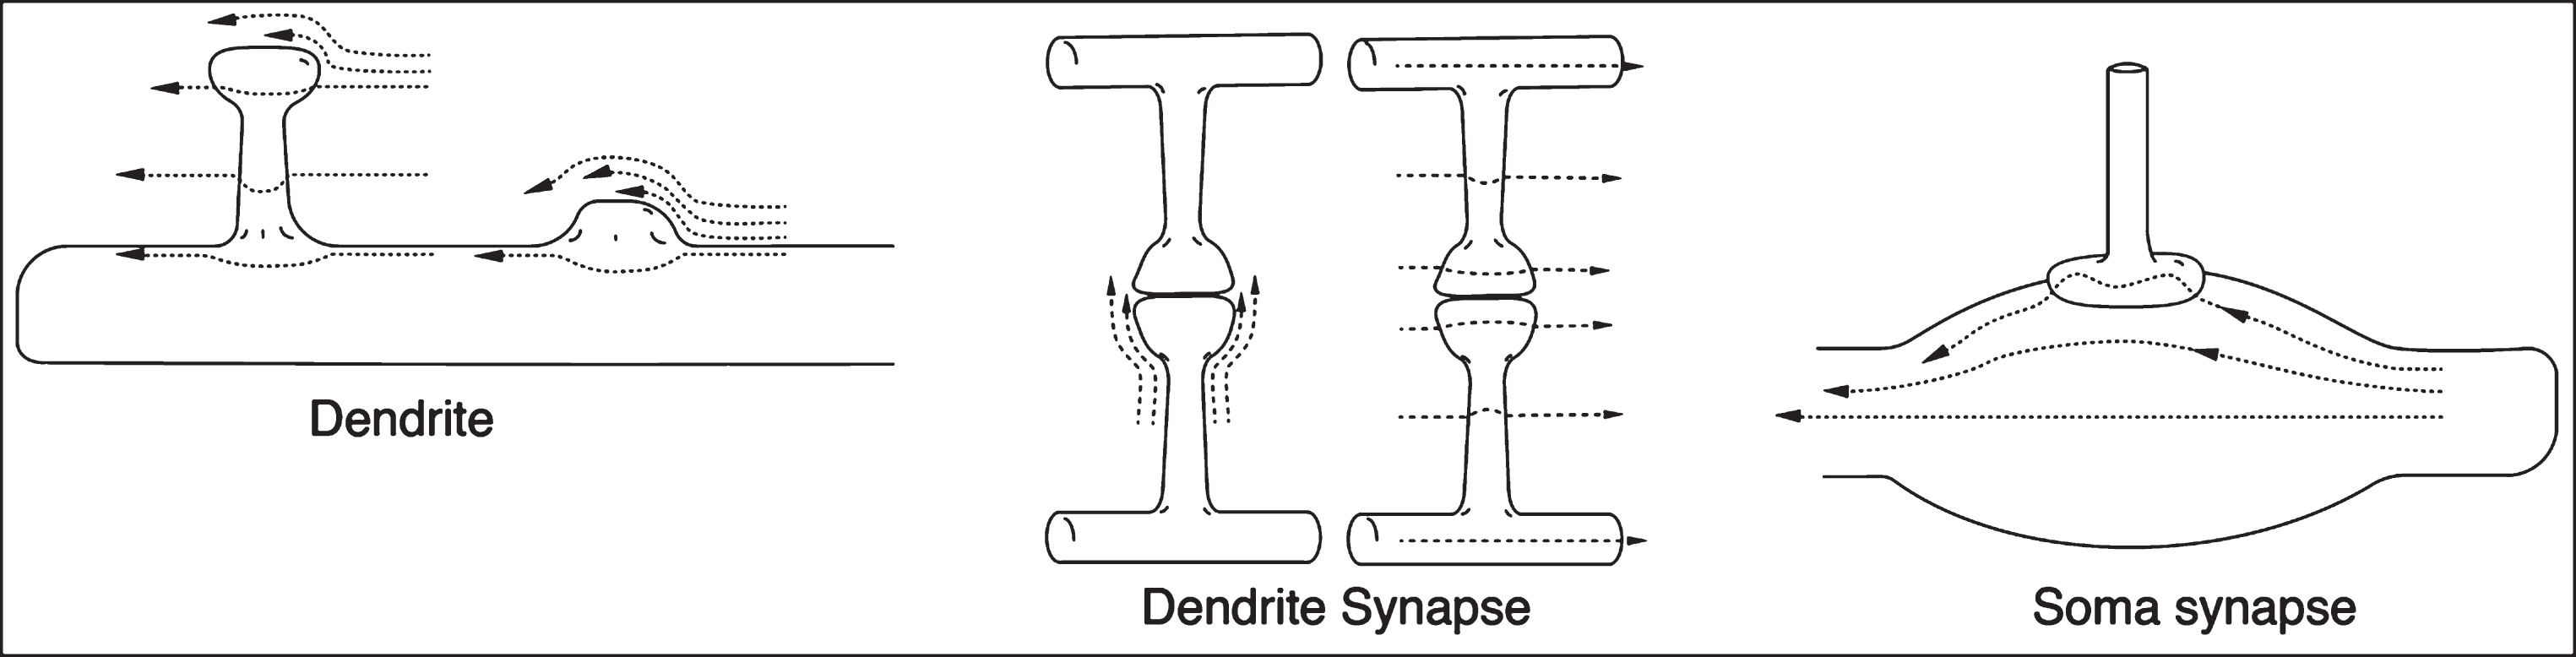 Laminar flow profiles for a series of neuron and synaptic surfaces. Only one or two of the many different flow directions are shown. Differences in arrow lengths determine the shear rate differences. Not drawn to scale. Other neighboring structures such as astrocytes, microglia, etc., that will also affect the shear rates are not shown.